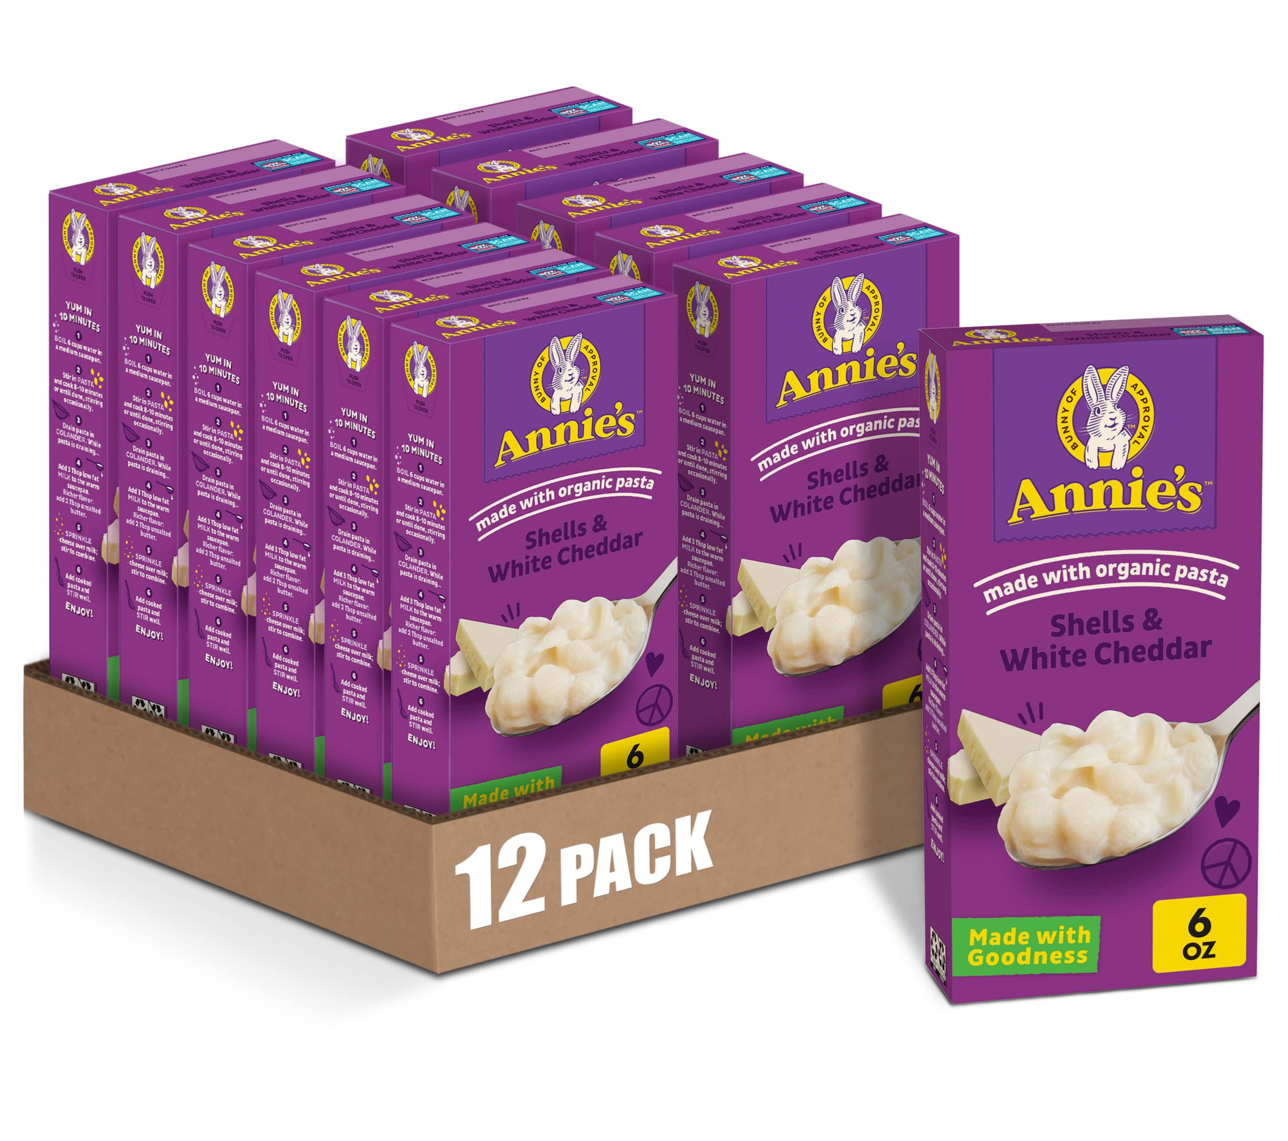 Annie’s White Cheddar Shells Macaroni & Cheese Dinner with Organic Pasta, 6 OZ (Pack of 12) Amazon with Subscribe and save $12.09